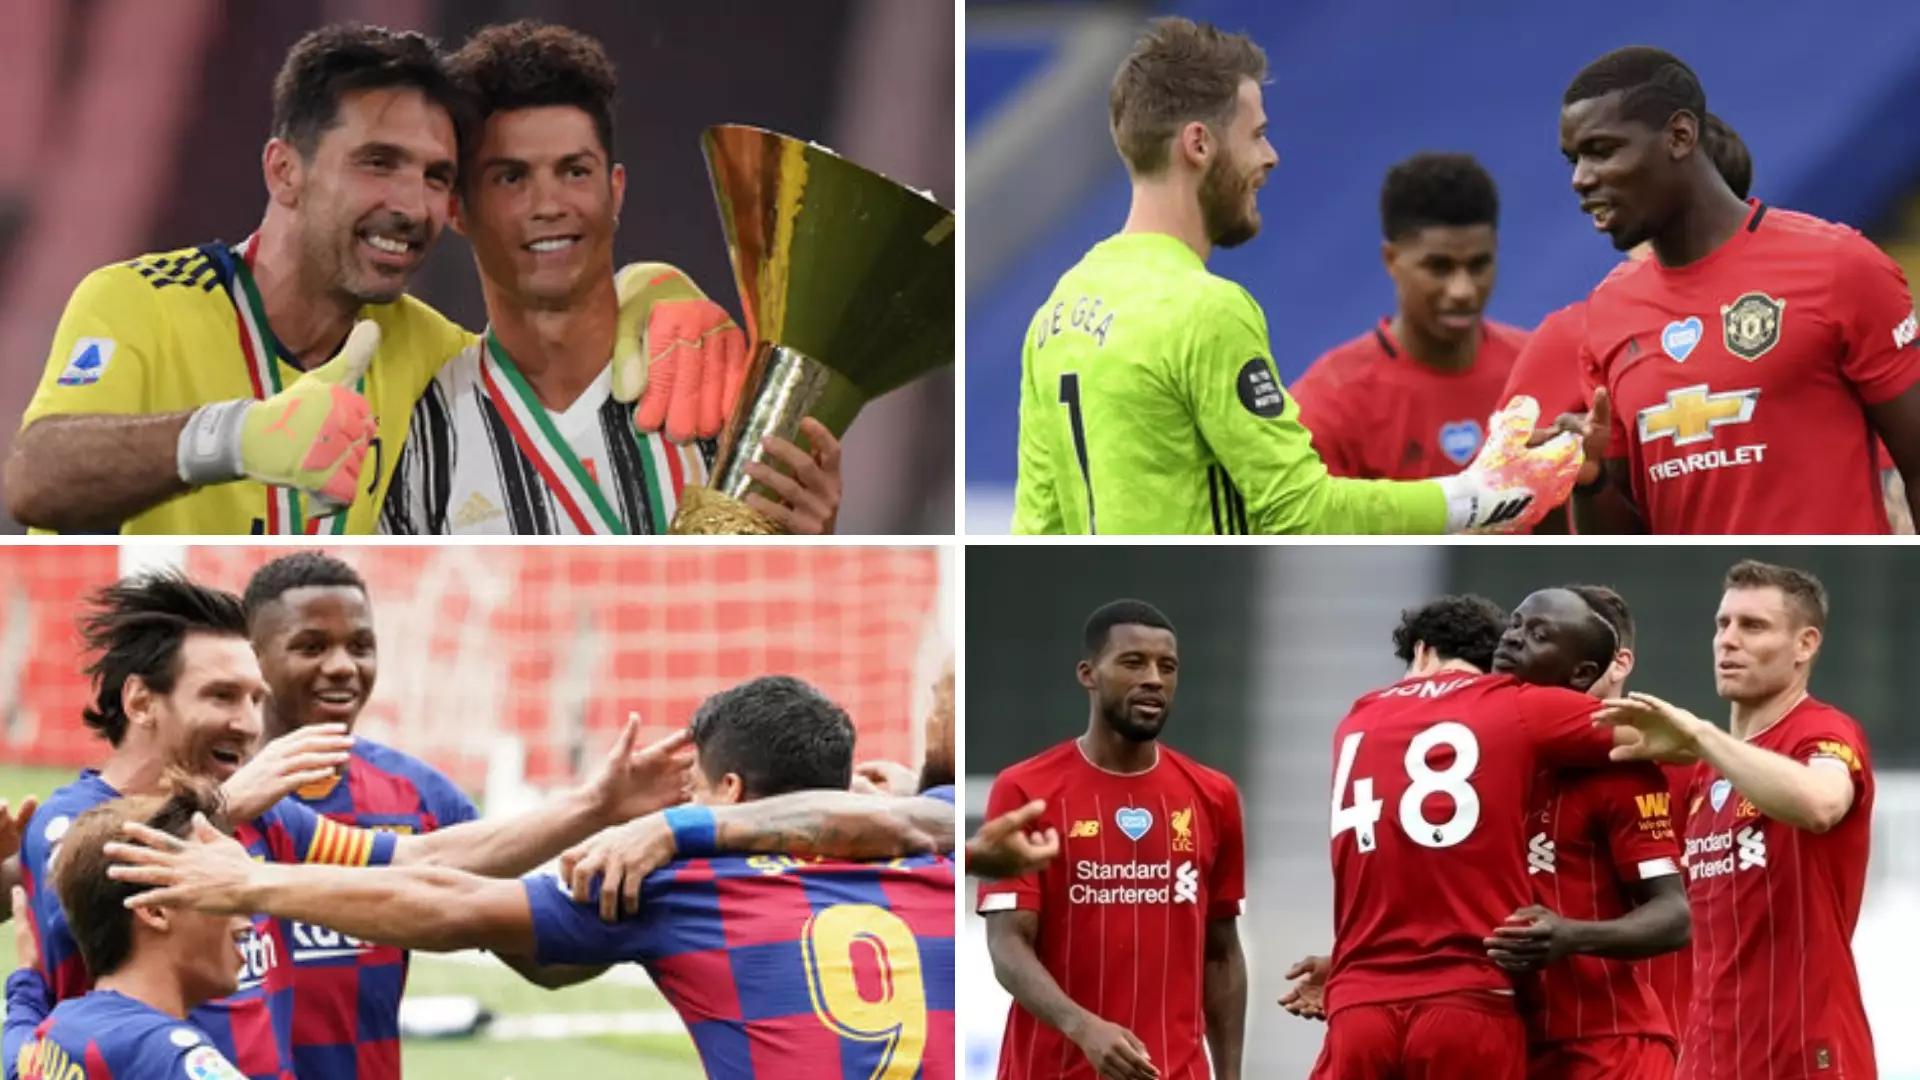 The 50 Best Teams In World Football Have Been Named And Ranked